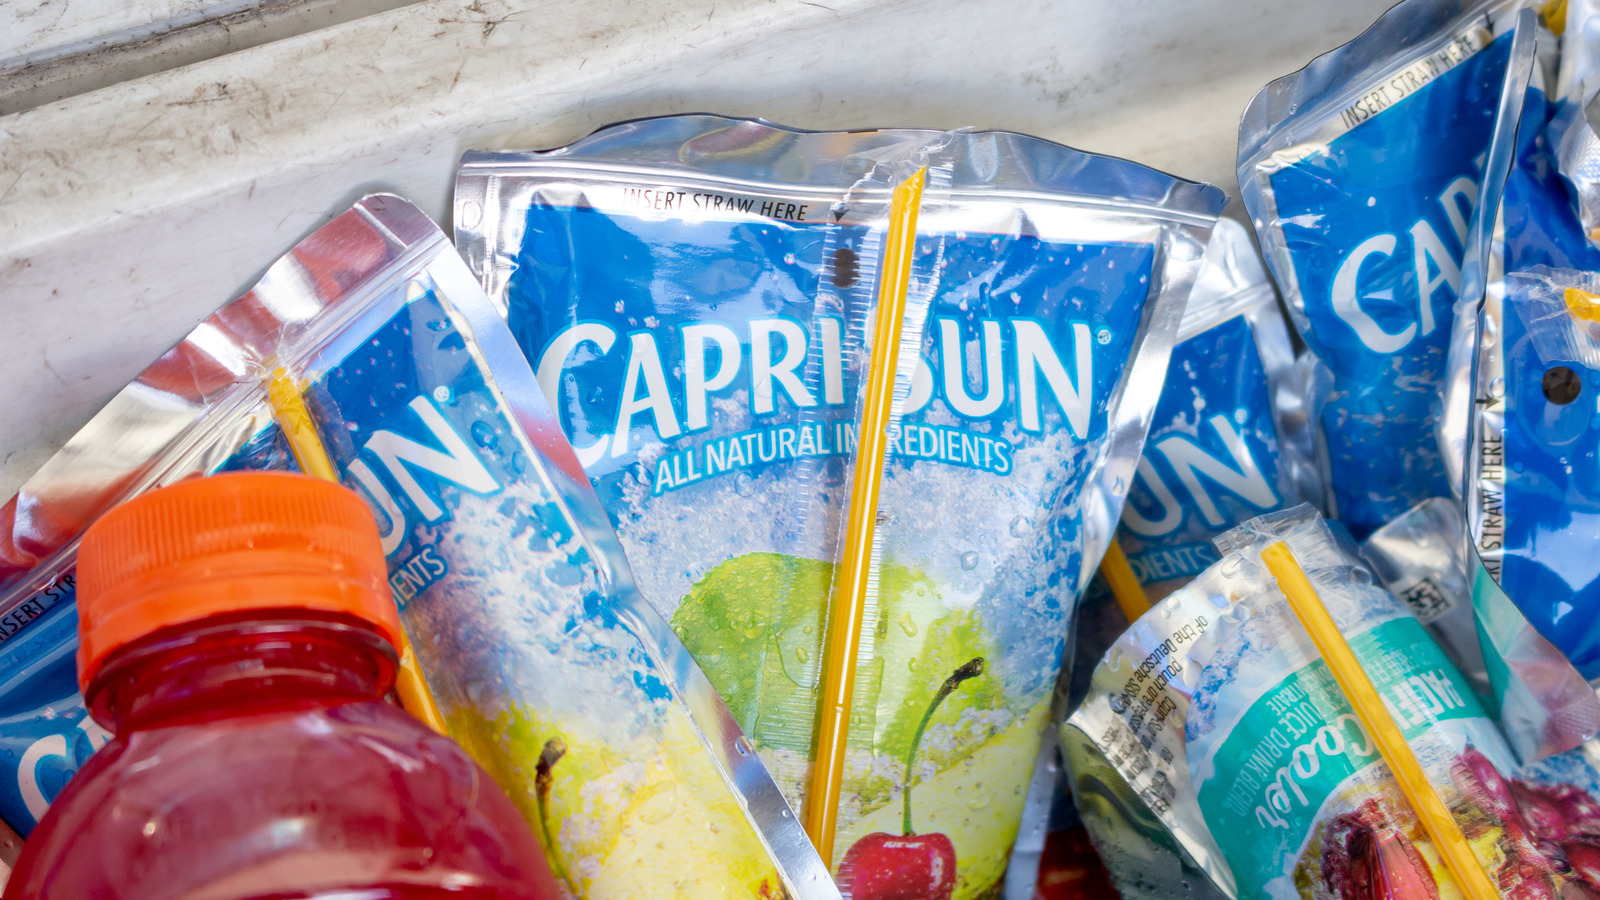 Costco Is Kicking Off Summer With A Very Adult Version Of Capri Sun